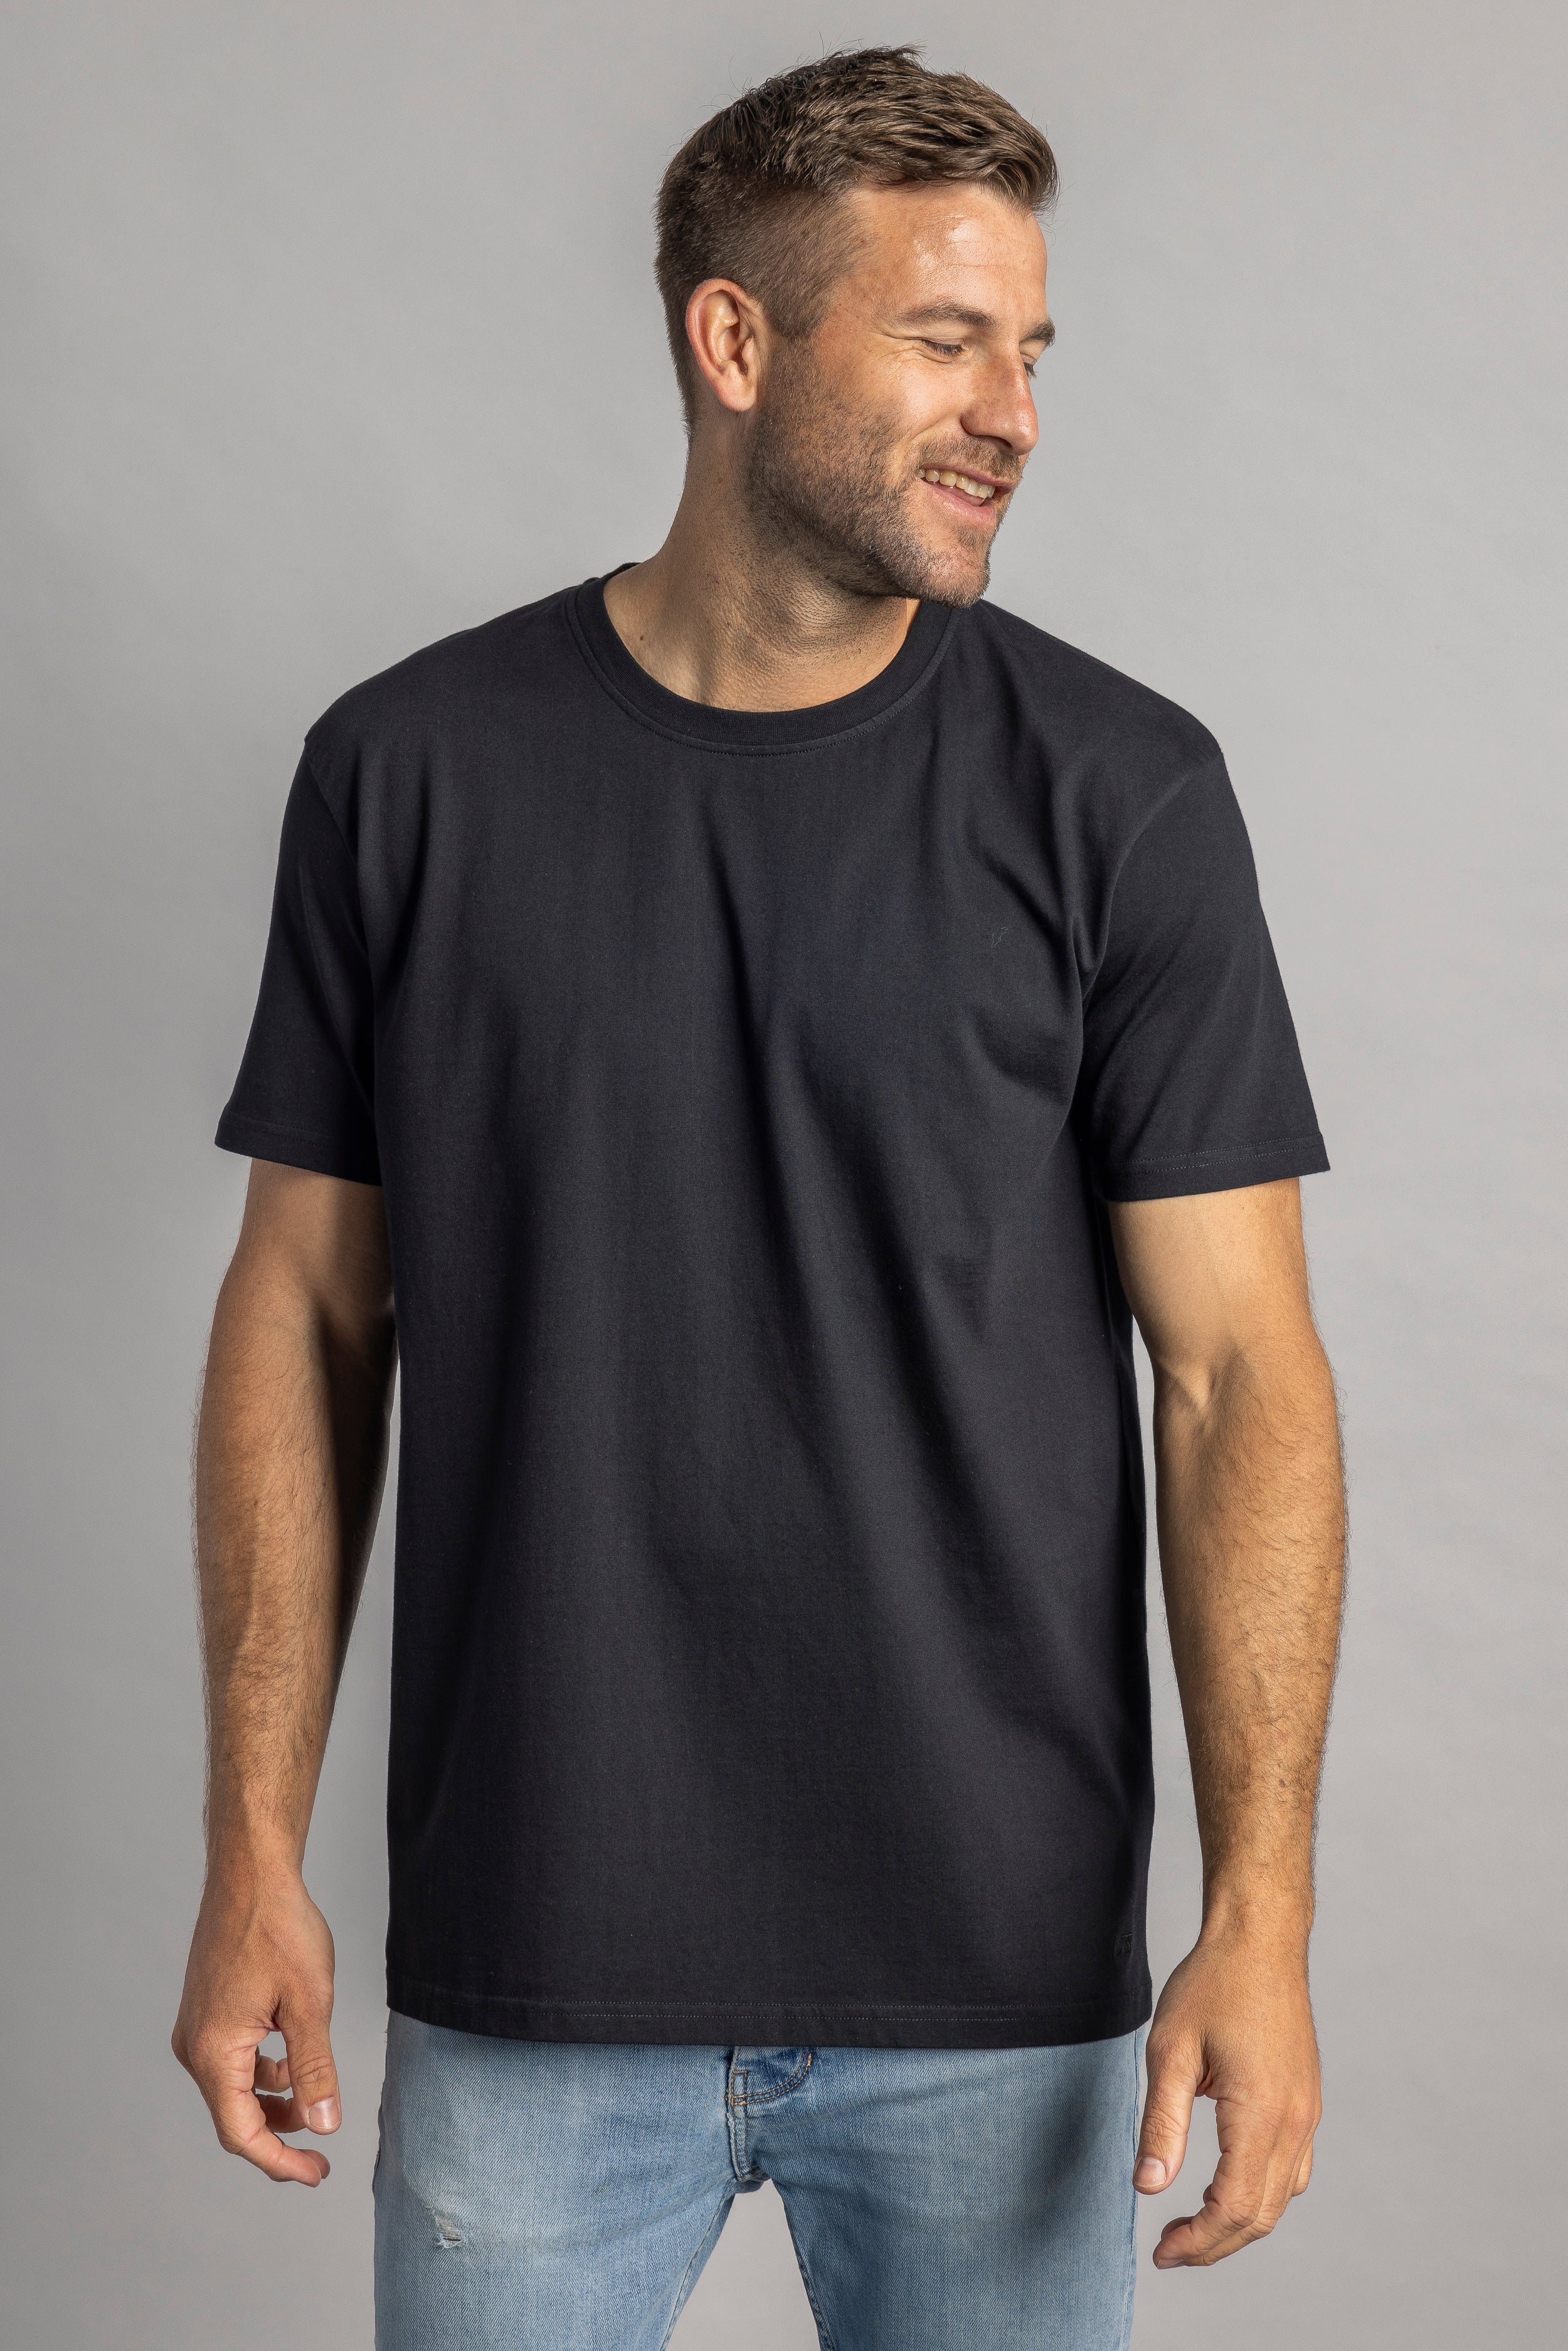 Black T-shirt Premium Blank Standard made from 100% organic cotton from DIRTS